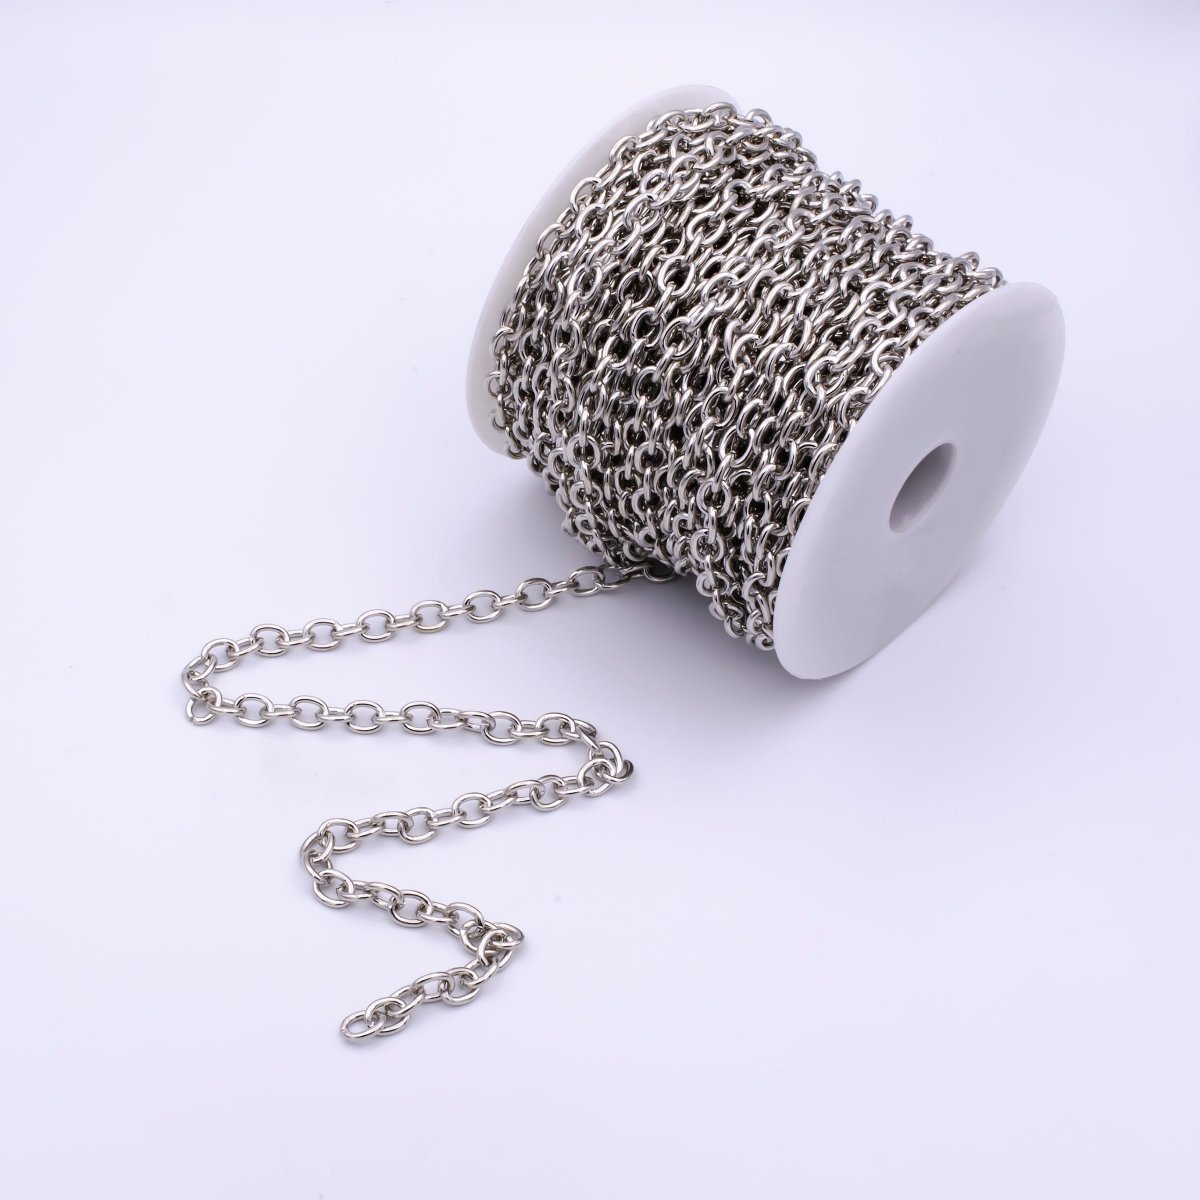 White Gold Filled Cable Chain, 9X7mm Silver Cable Rolo Wholesale Bulk by Yard, Unfinished Chain For Craft Making | ROLL-565 Clearance Pricing - DLUXCA